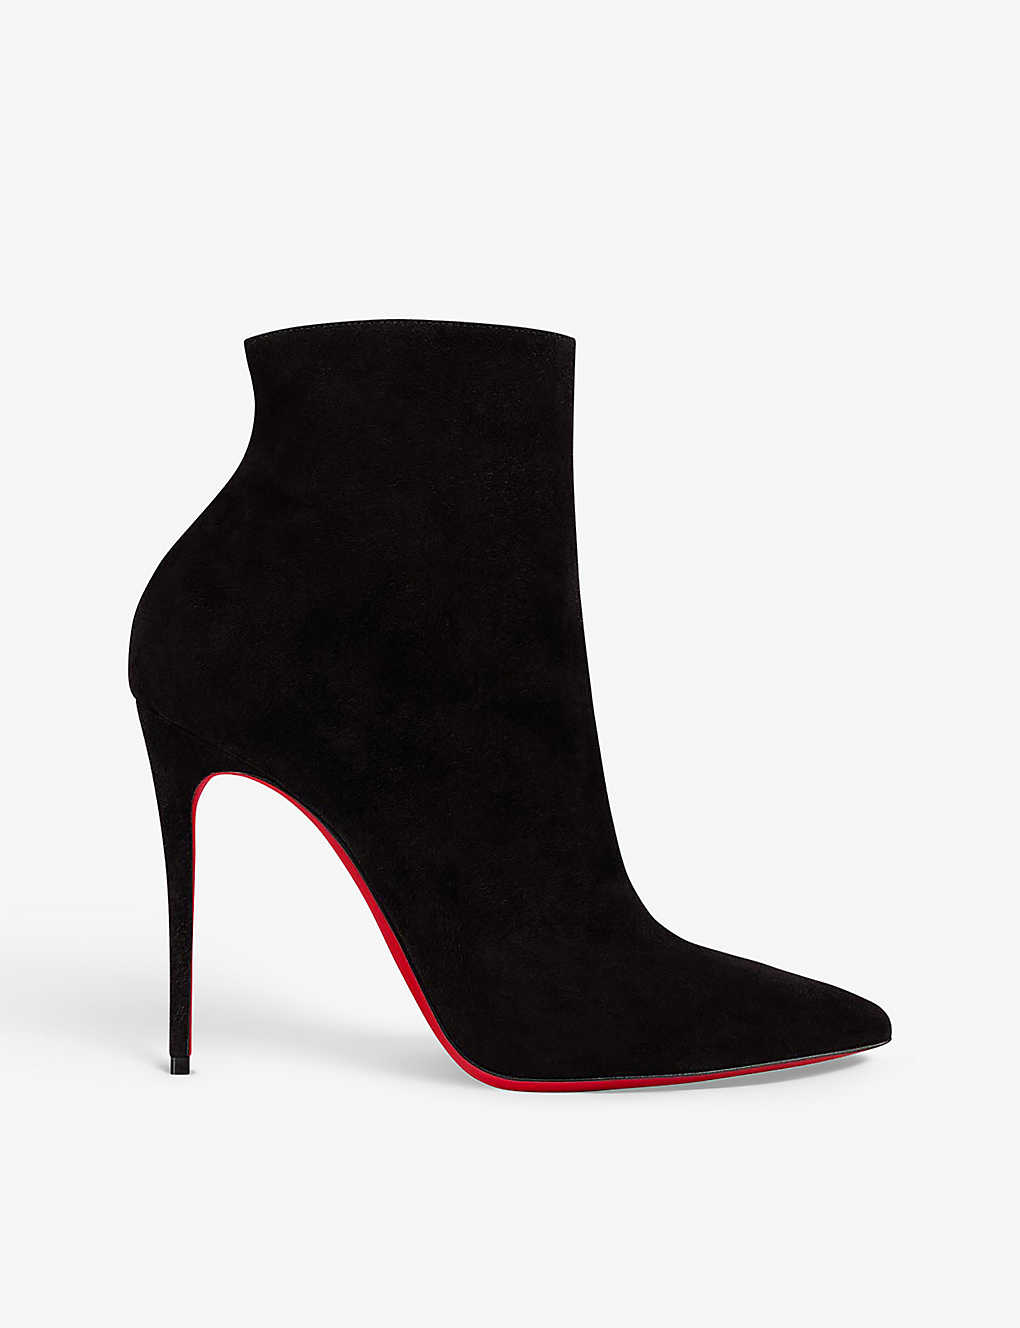 Shop Christian Louboutin Women's Black So Kate 100 Suede Heeled Ankle Boots